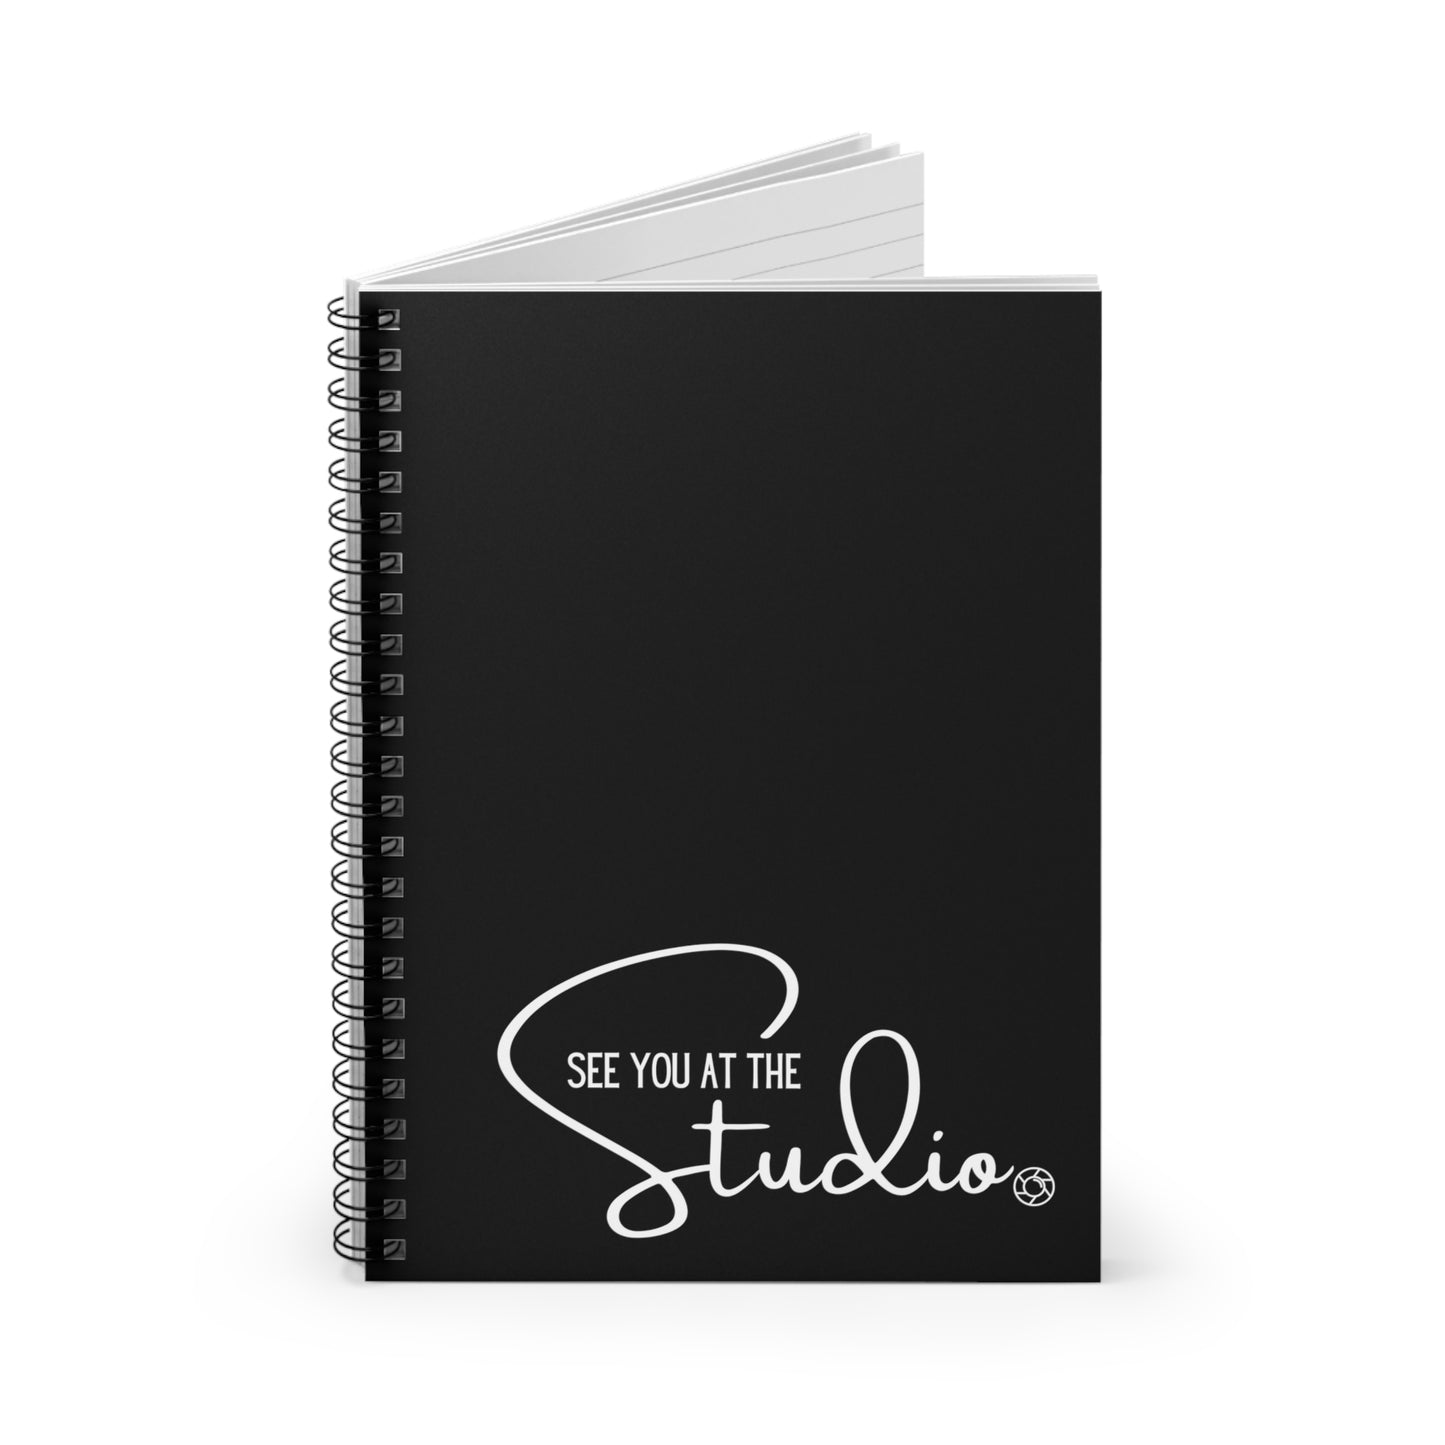 See you at the Studio - Spiral Notebook - Ruled Line